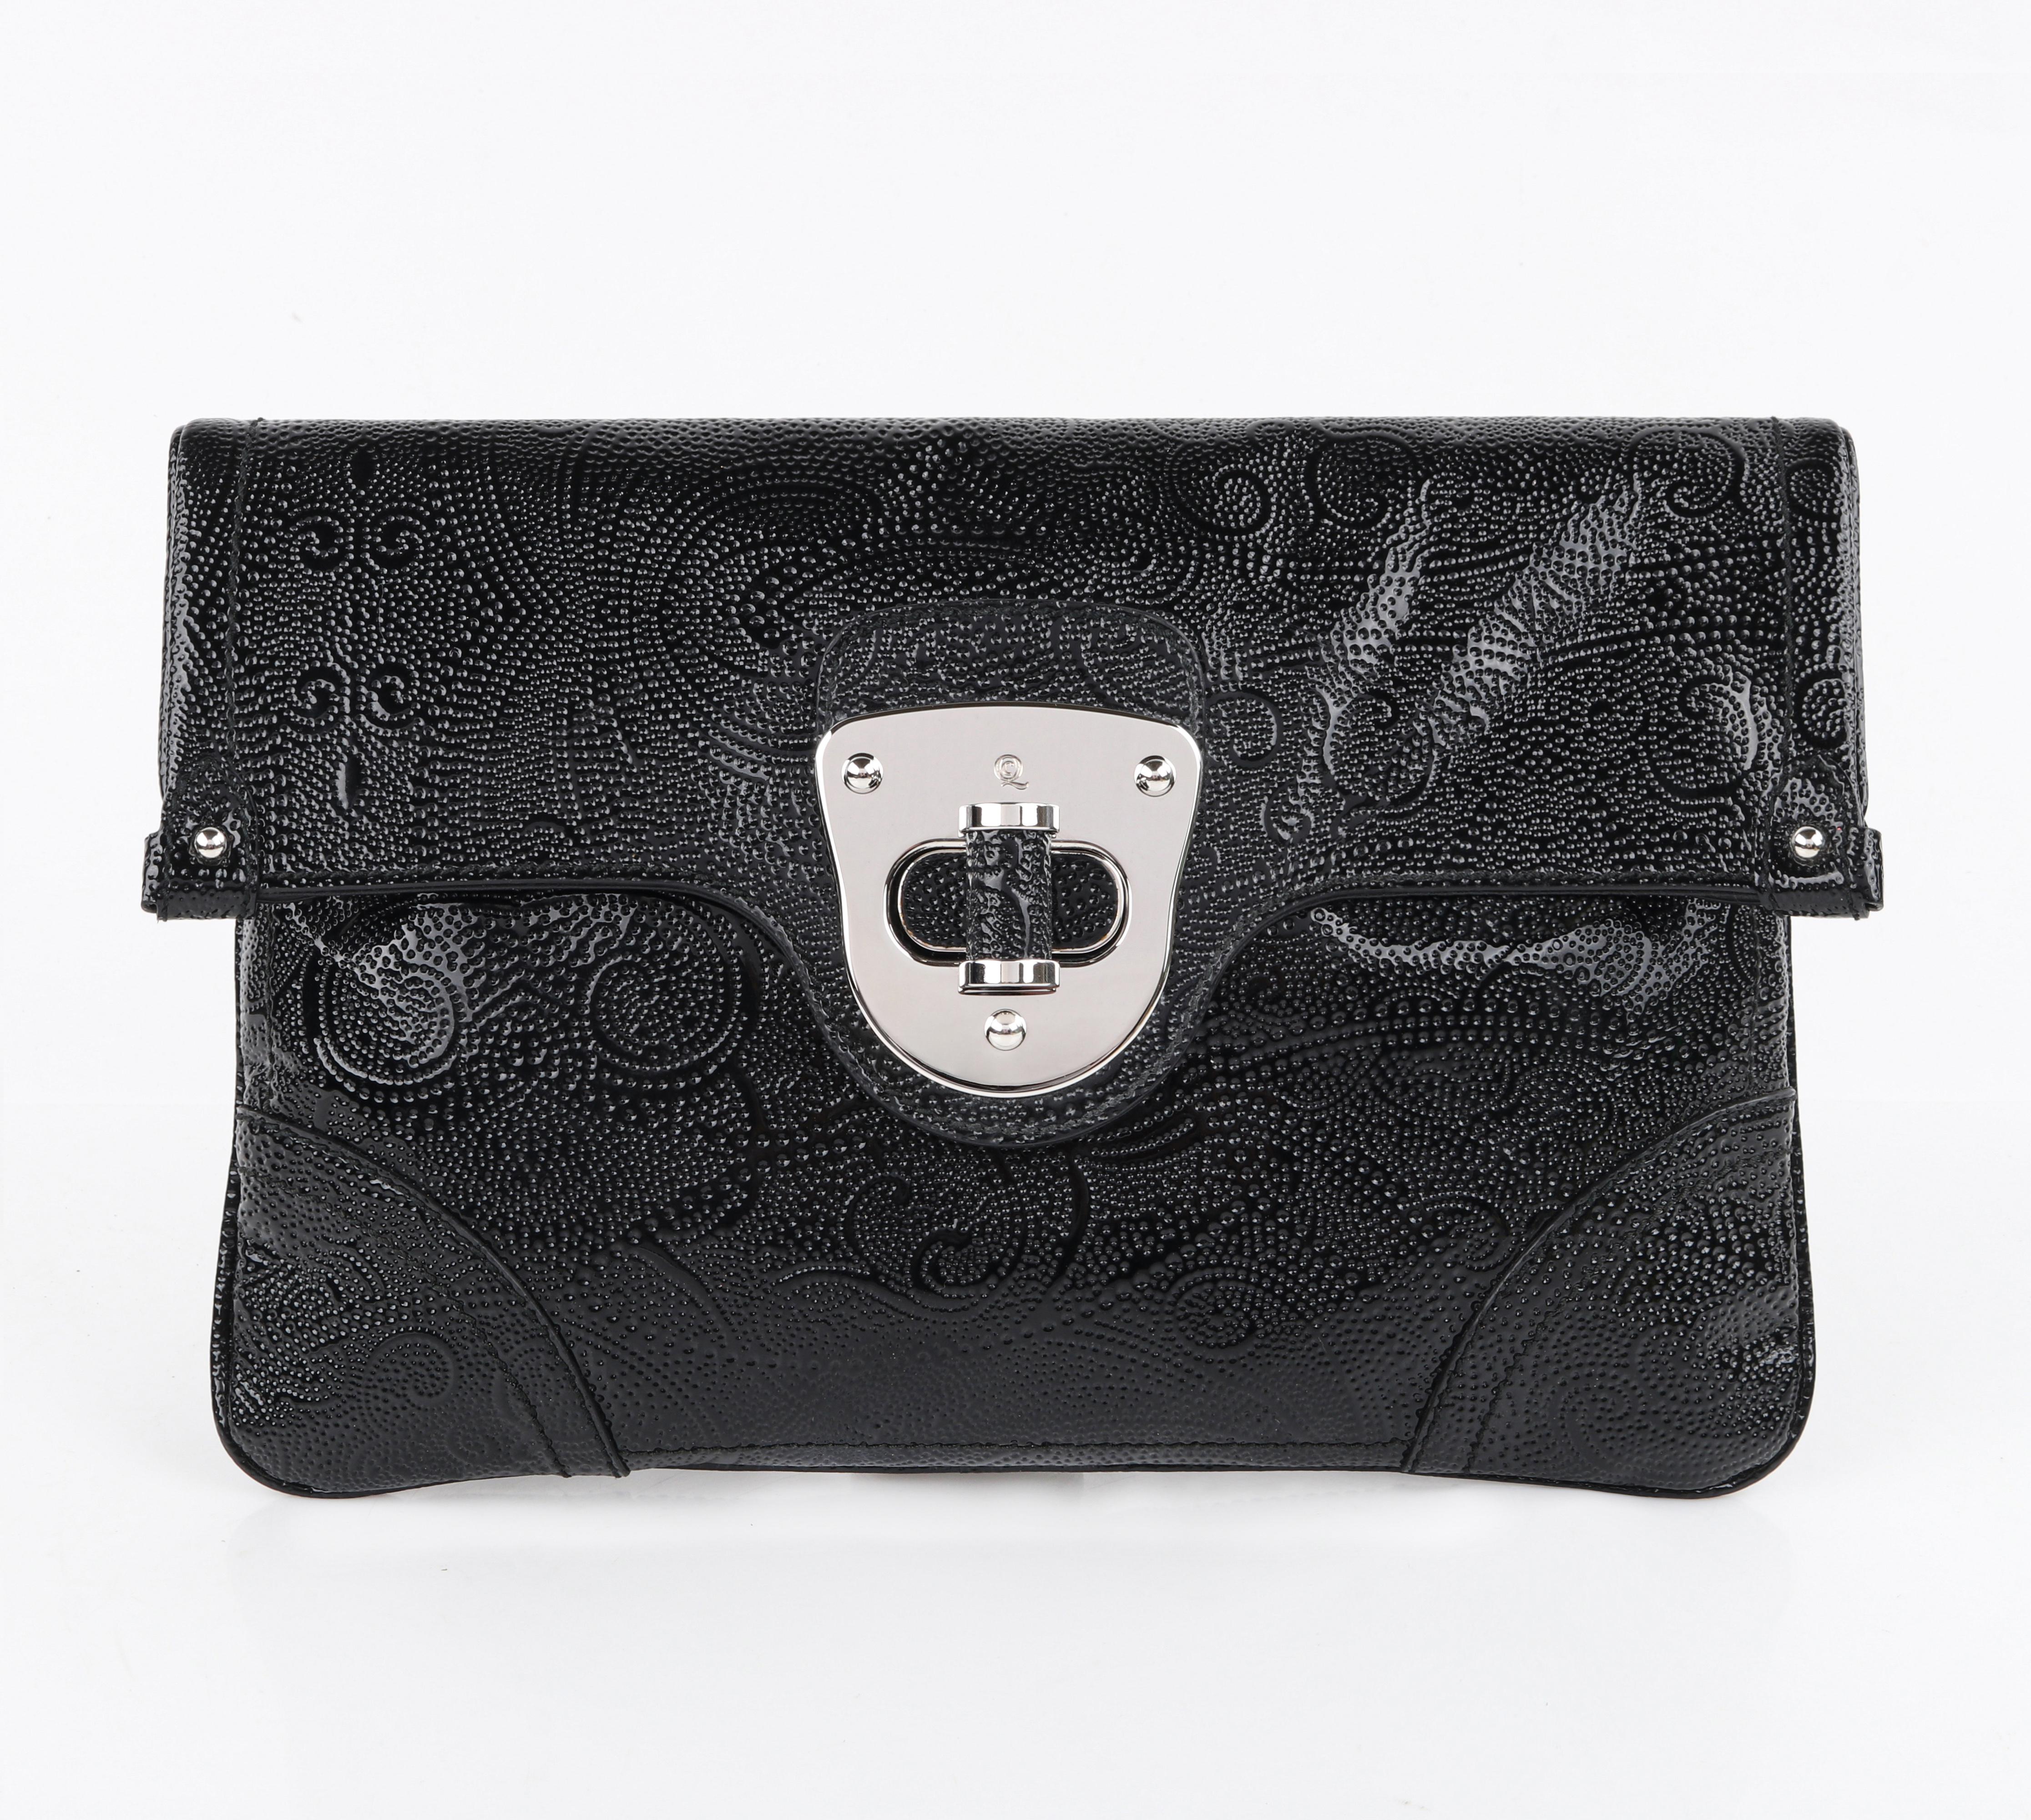 ALEXANDER MCQUEEN c.2008 Black Patent Leather Paisley Print Flat Large Clutch Purse Bag

Brand / Manufacturer: Alexander McQueen
Circa: 2008
Style: Clutch, handbag
Color(s): Black & silver
Lined: Yes
Unmarked Fabric Content (feel of): Textured